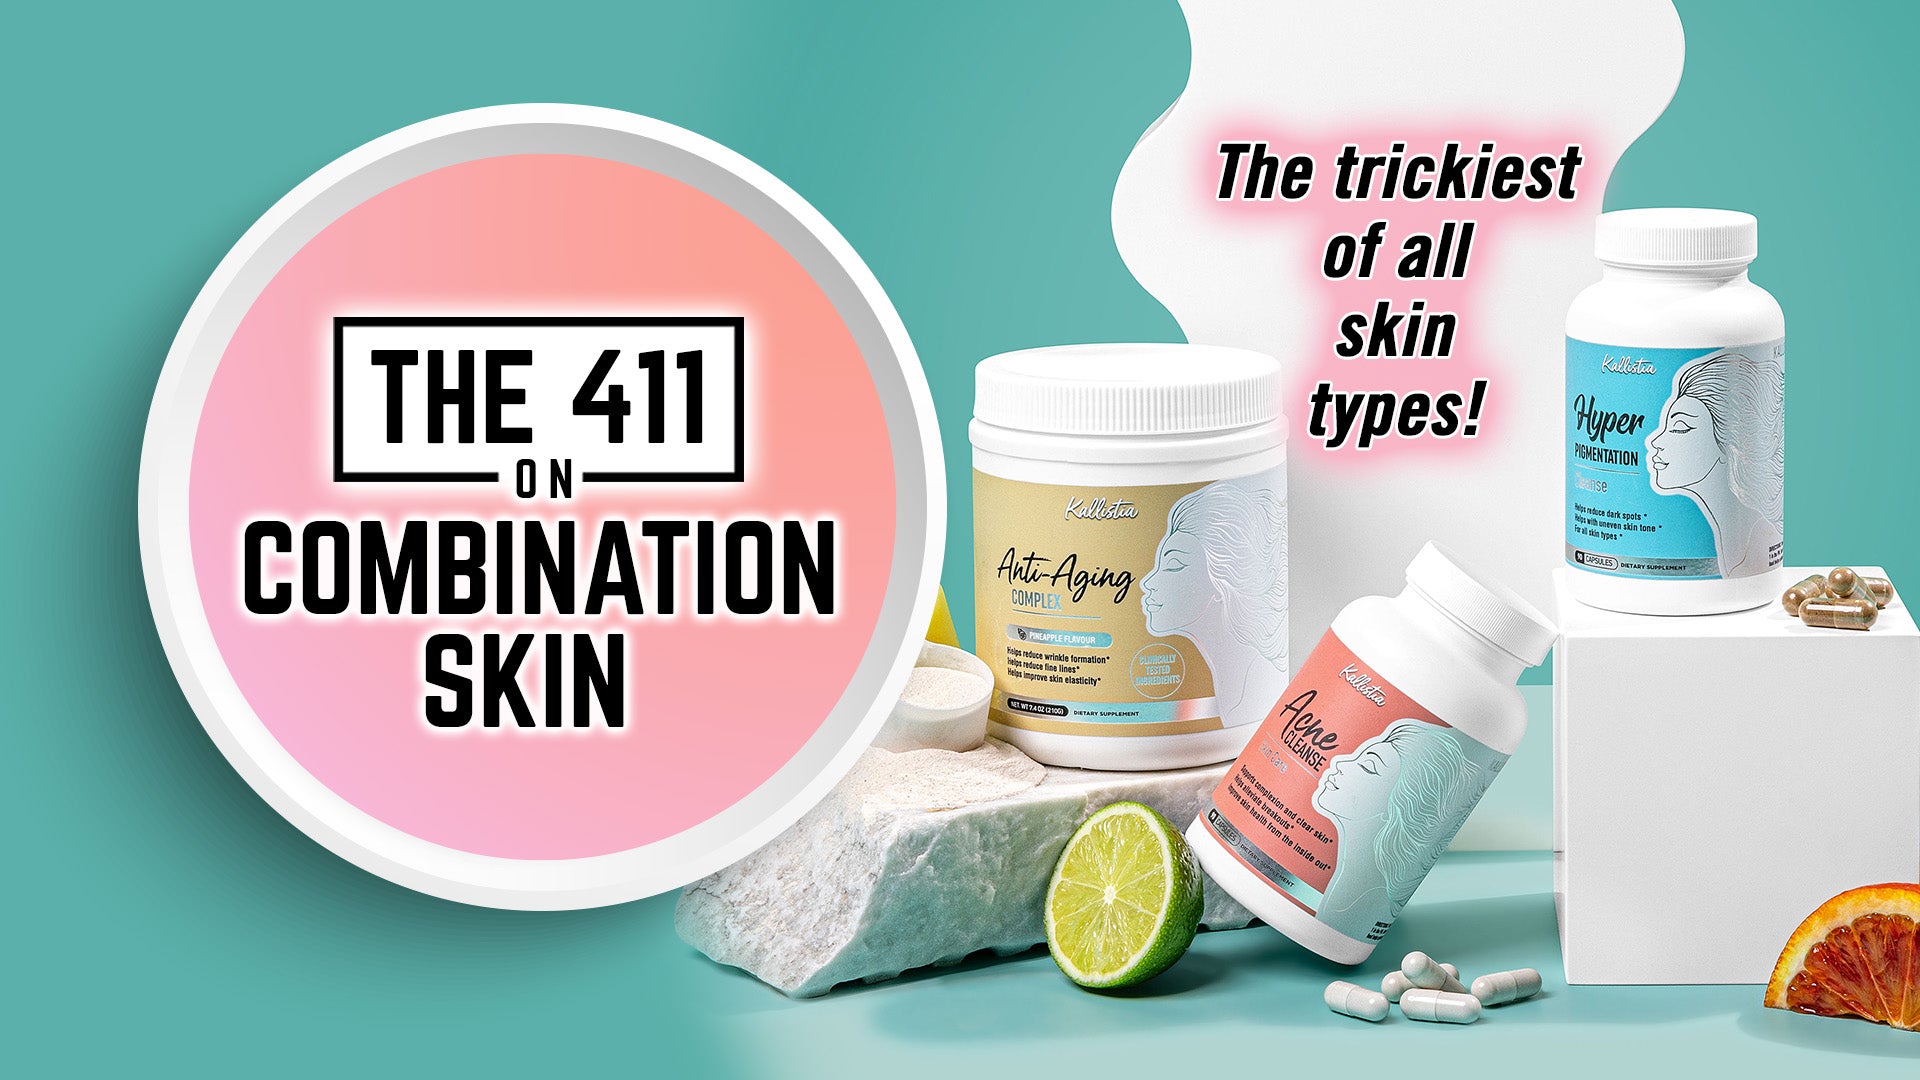 The 411 on Combination Skin